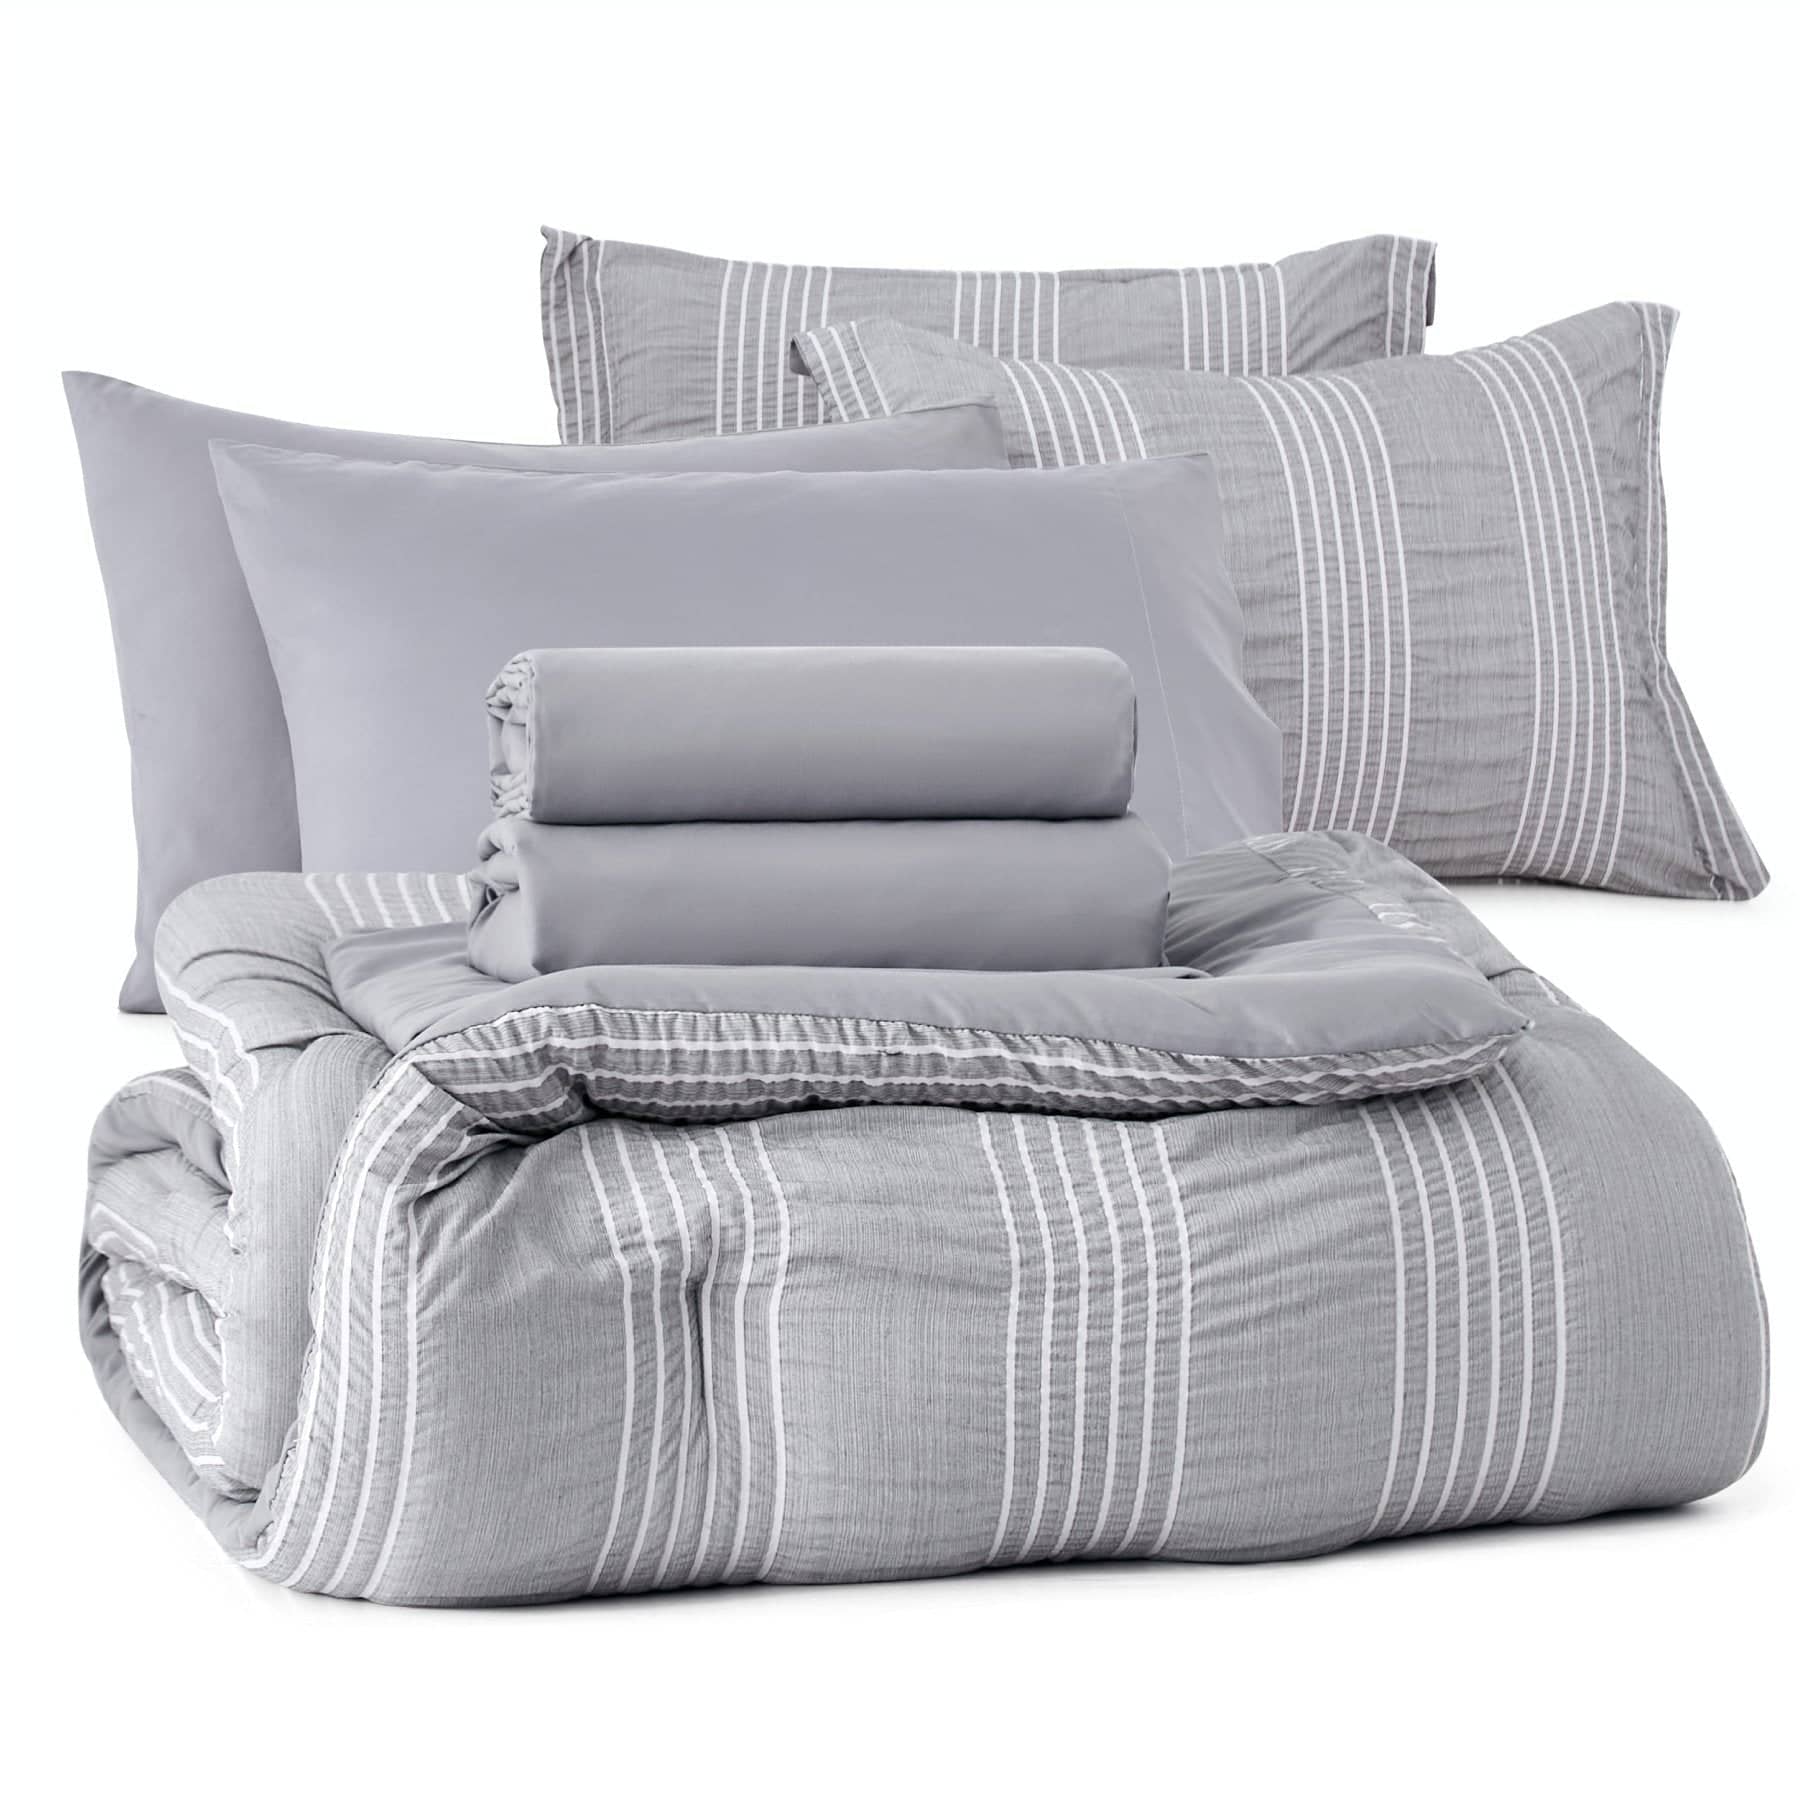 Bedsure Comforter Set 5/7 Pieces - Striped Beddding Sets, Bed in a